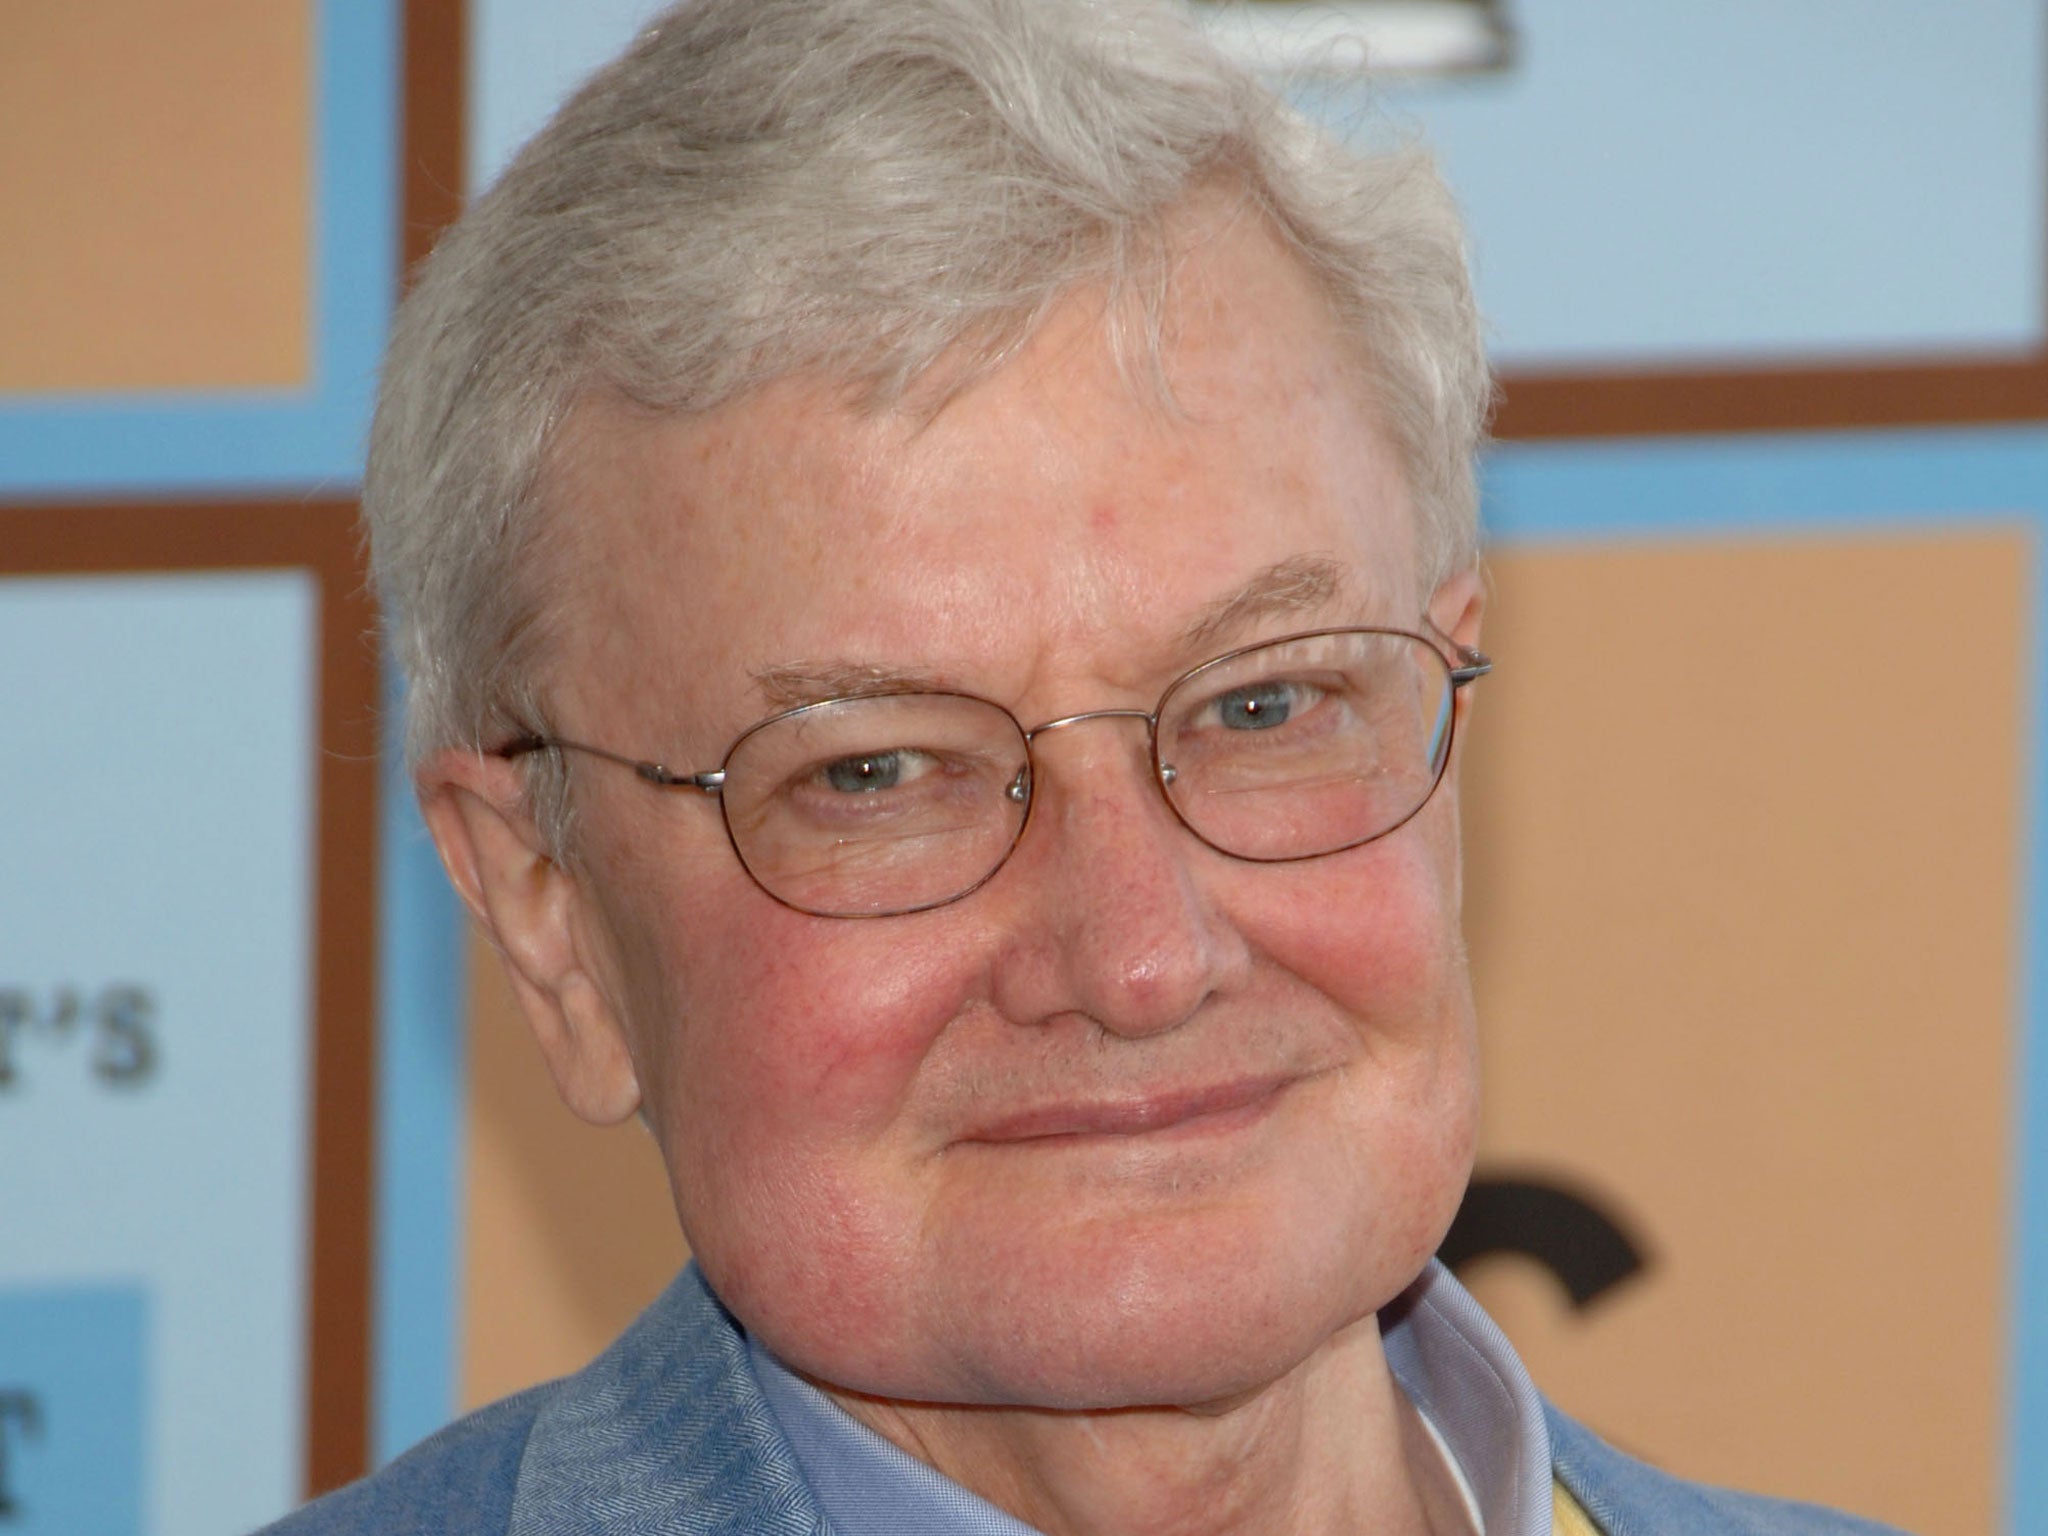 Pulitzer Prize Winning Us Film Critic Roger Ebert Dies Aged 70 The Independent